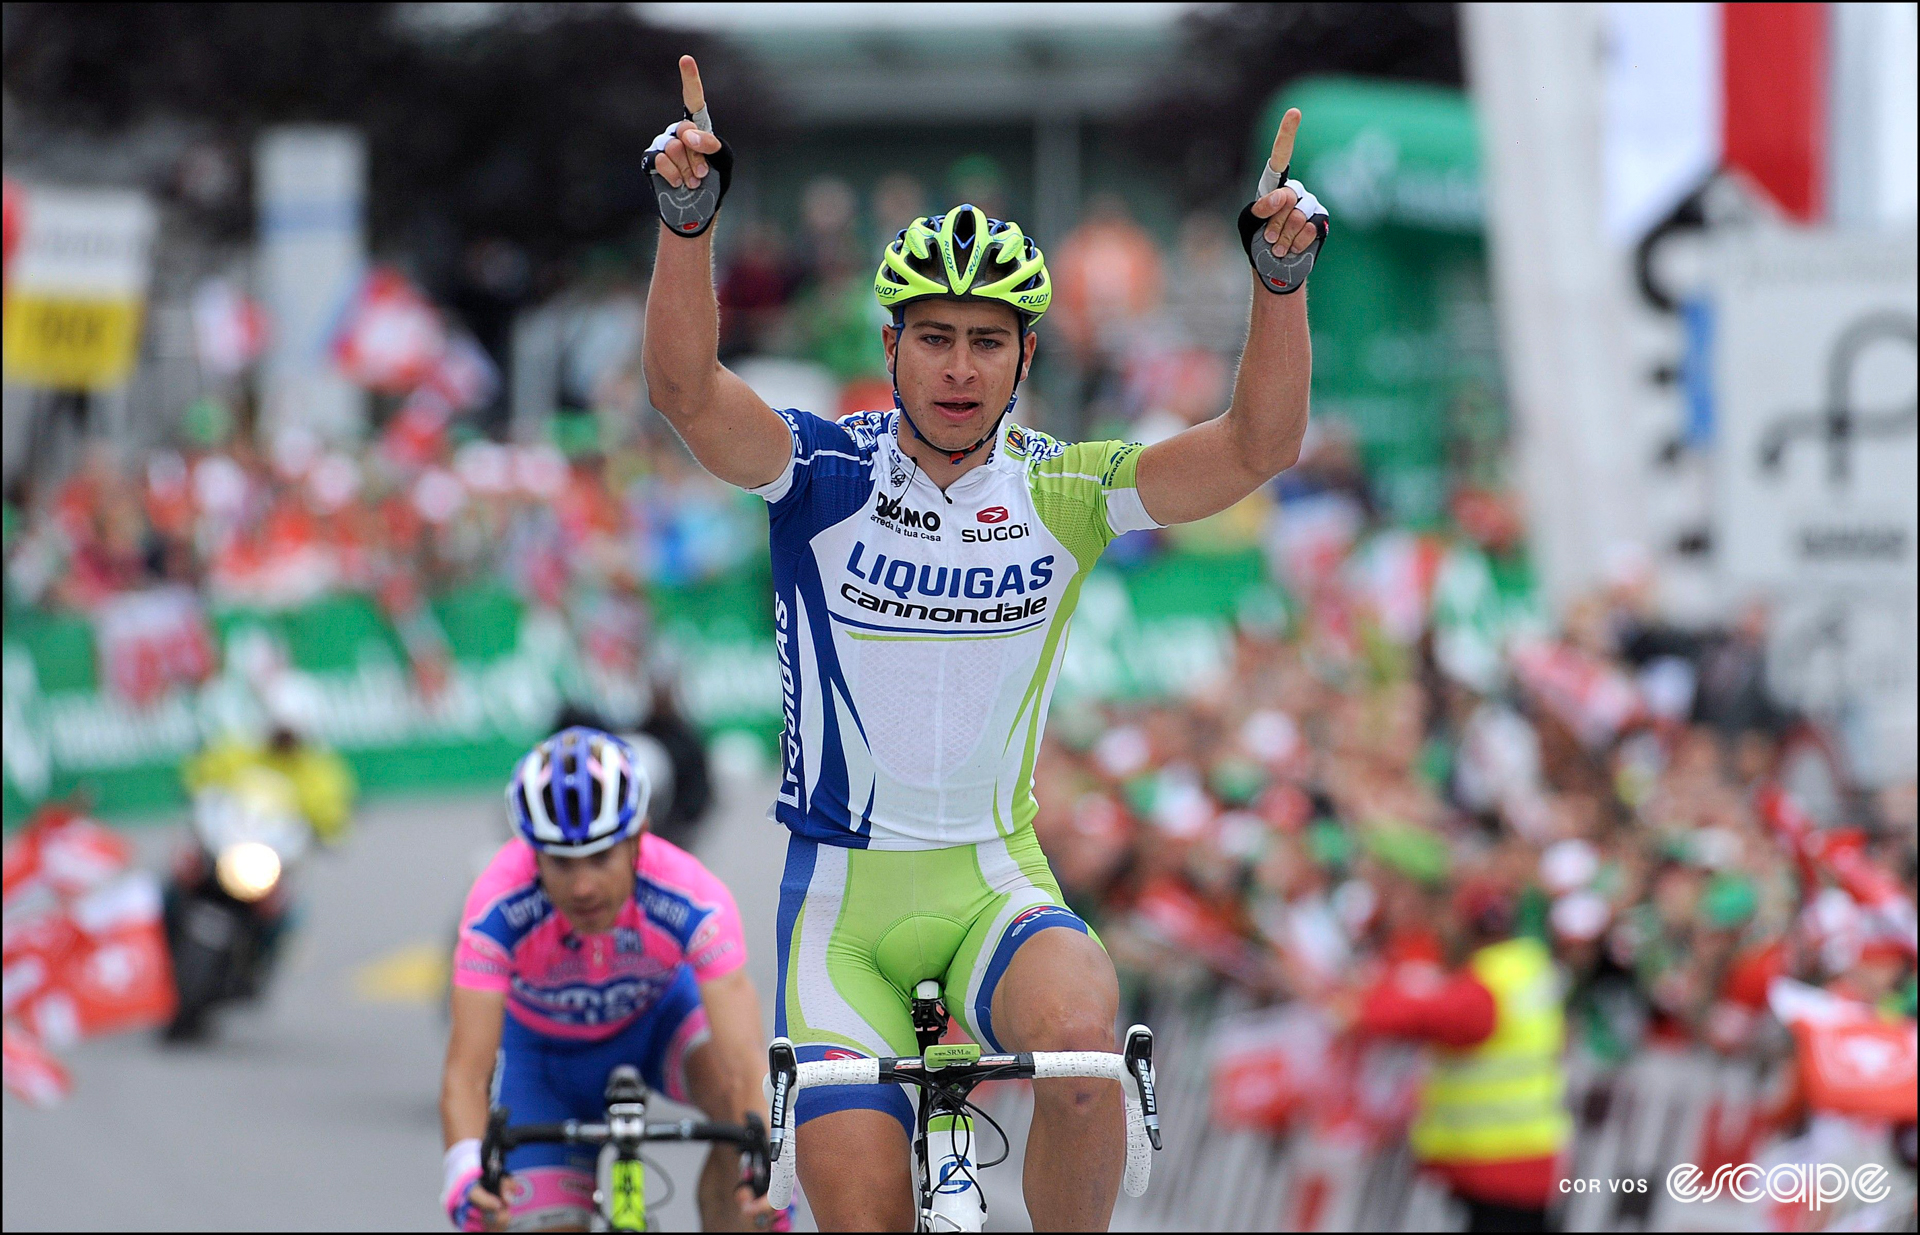 Peter Sagan celebrates winning a stage at the 2011 Tour de Suisse, with two index fingers pointing upward.